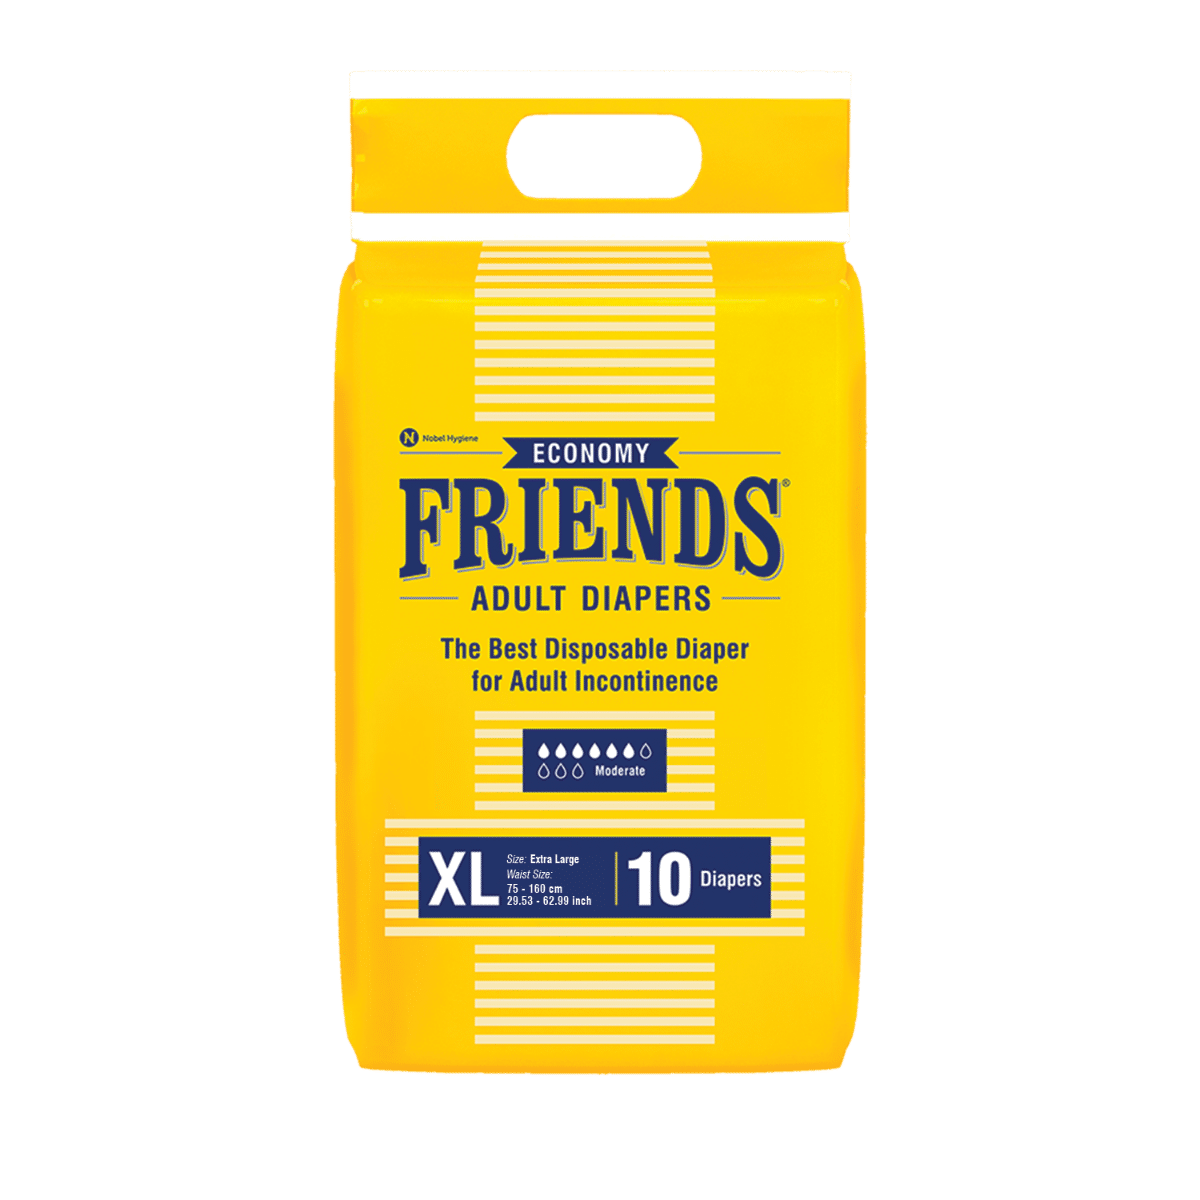 Buy Friends Economy Adult Diapers XL, 10 Count Online